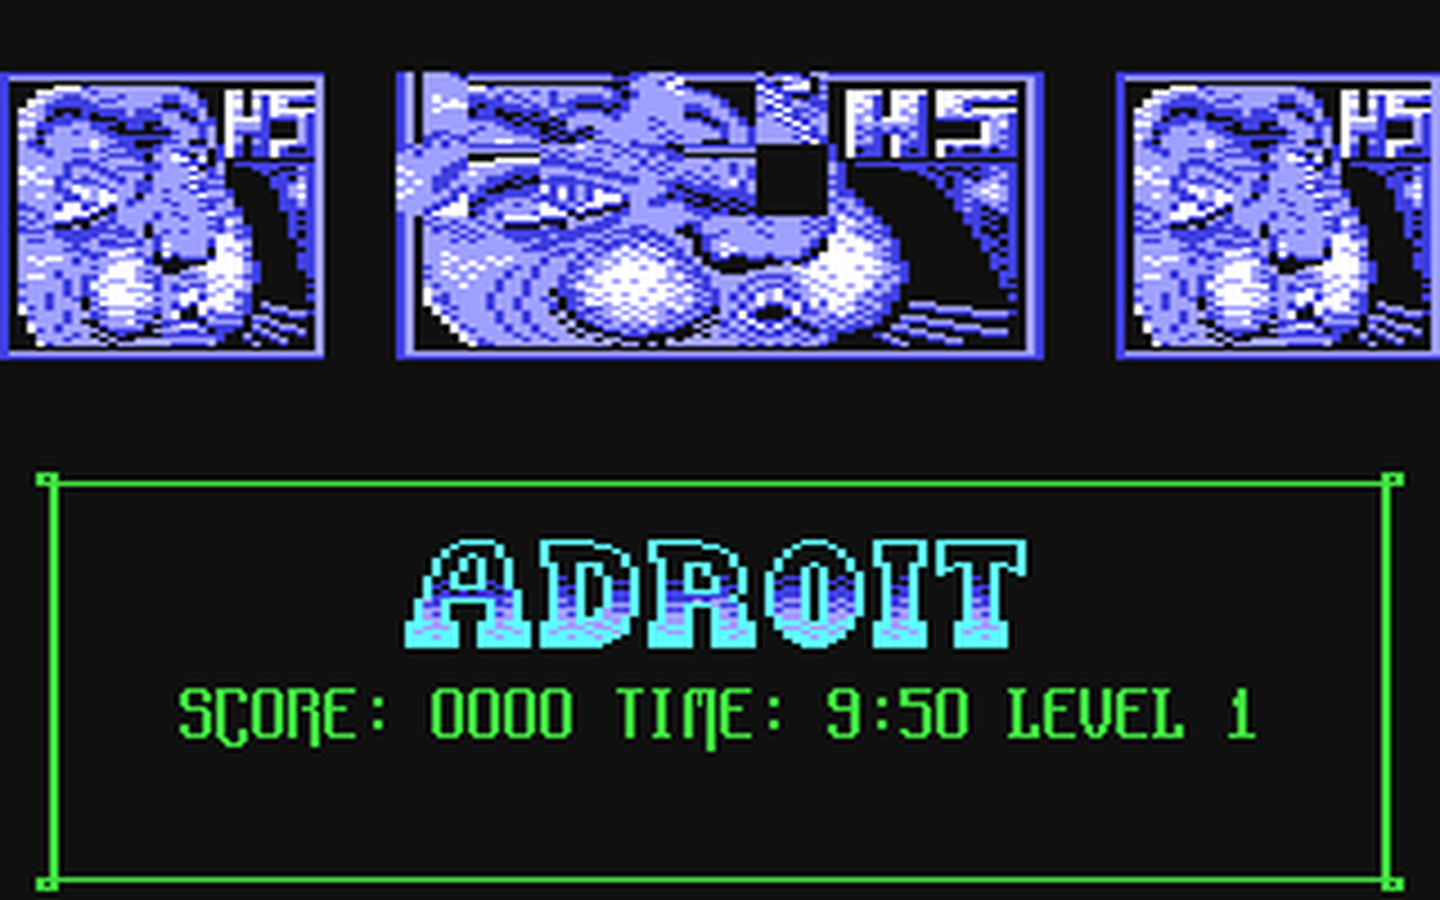 C64 GameBase Adroit_[Preview] (Preview) 1991